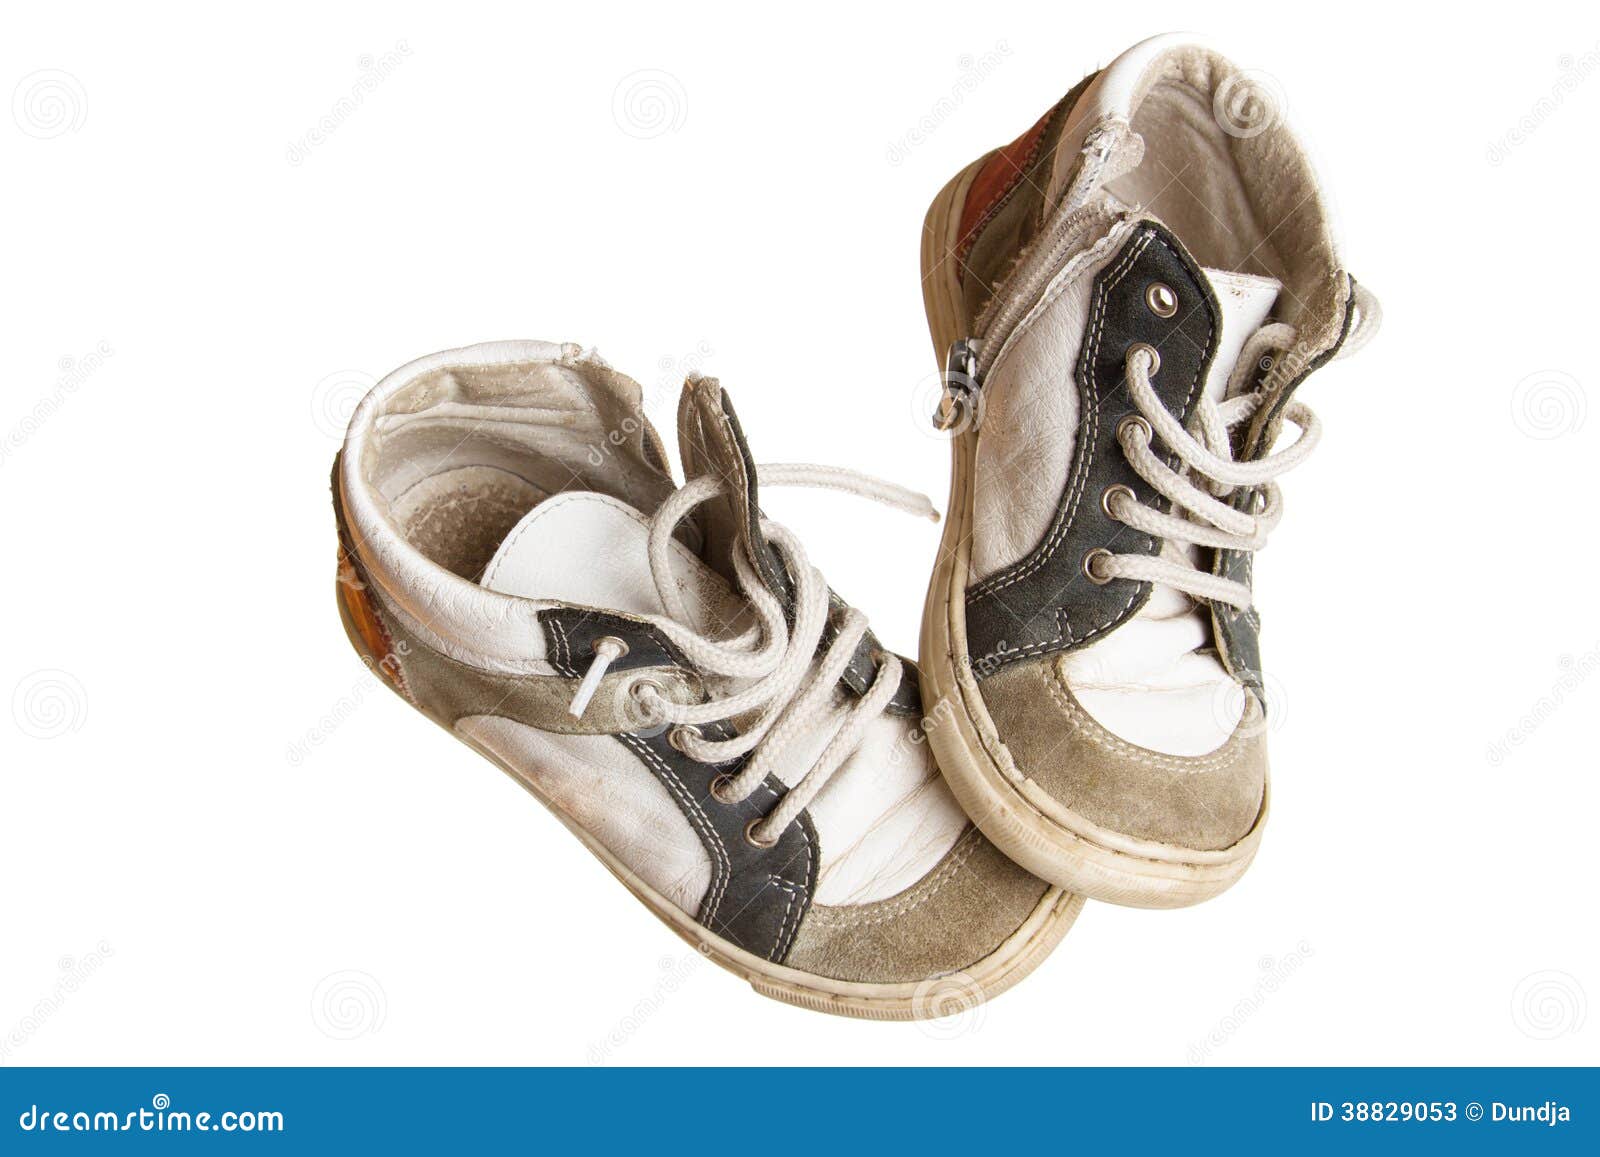 Kids shoes stock image. Image of background, rubber, classic - 38829053